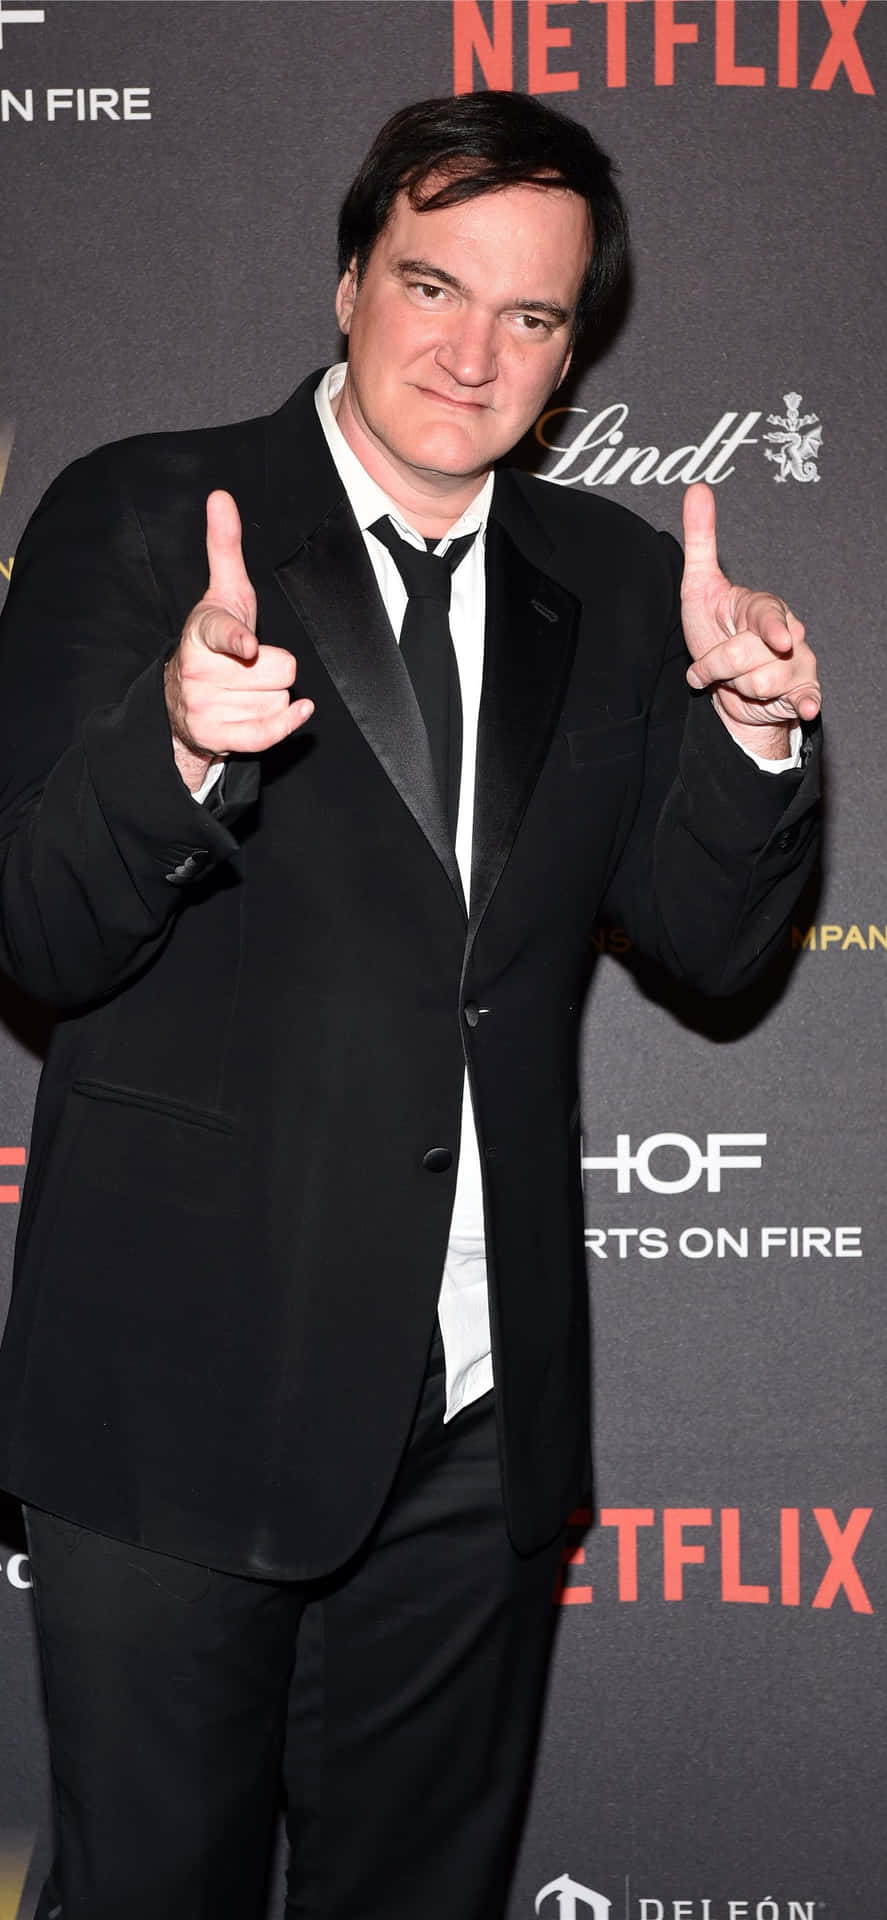 Quentin_ Tarantino_ Pointing_ Gesture_at_ Event Background